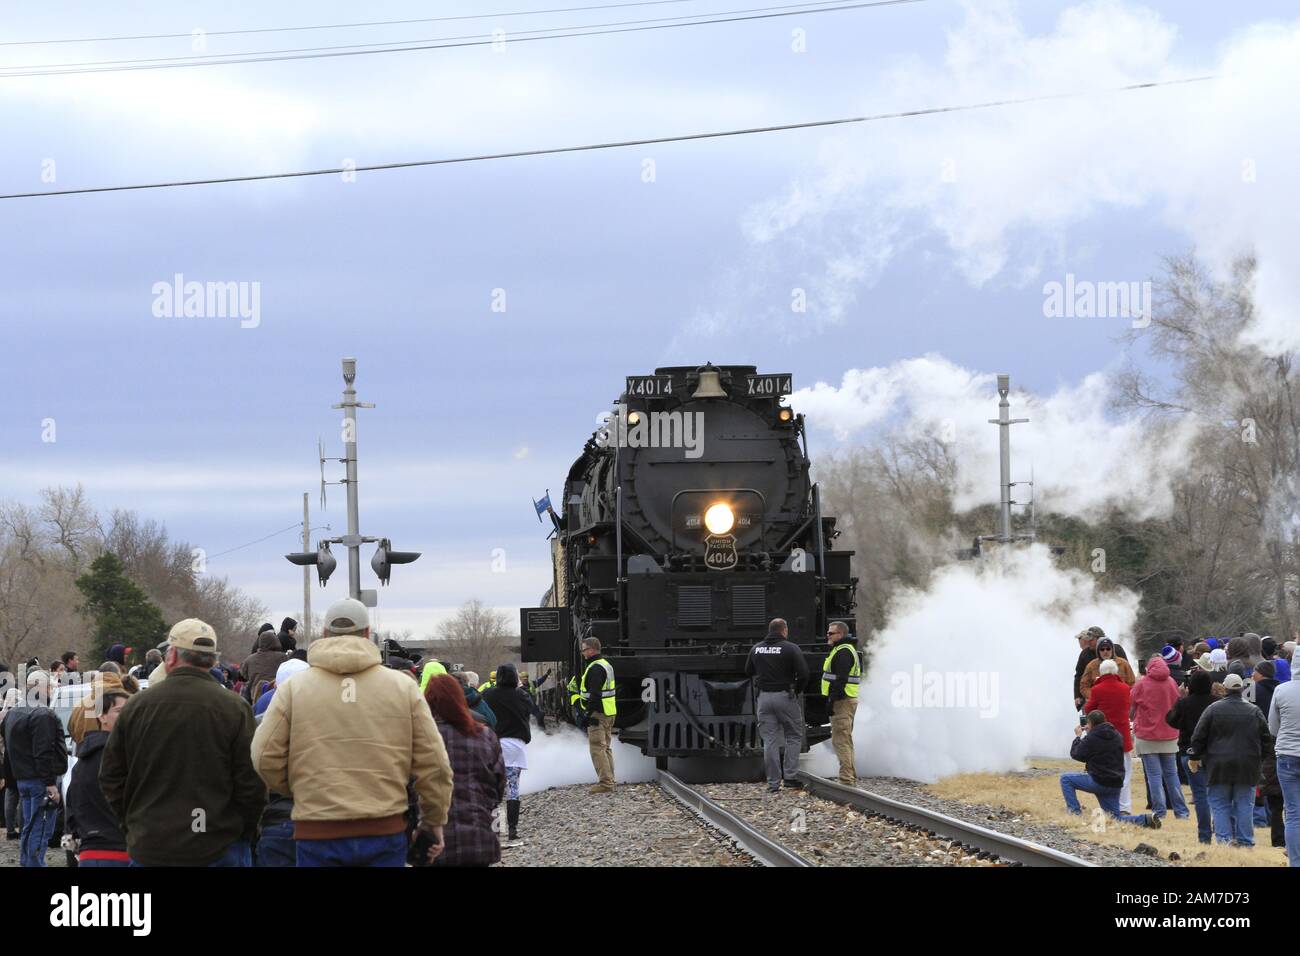 Big Boy 4014 in Ellsworth Kansas USA with Steam and Smoke on a Historical Day on 11-21-2019 that was on an overcast day. Stock Photo